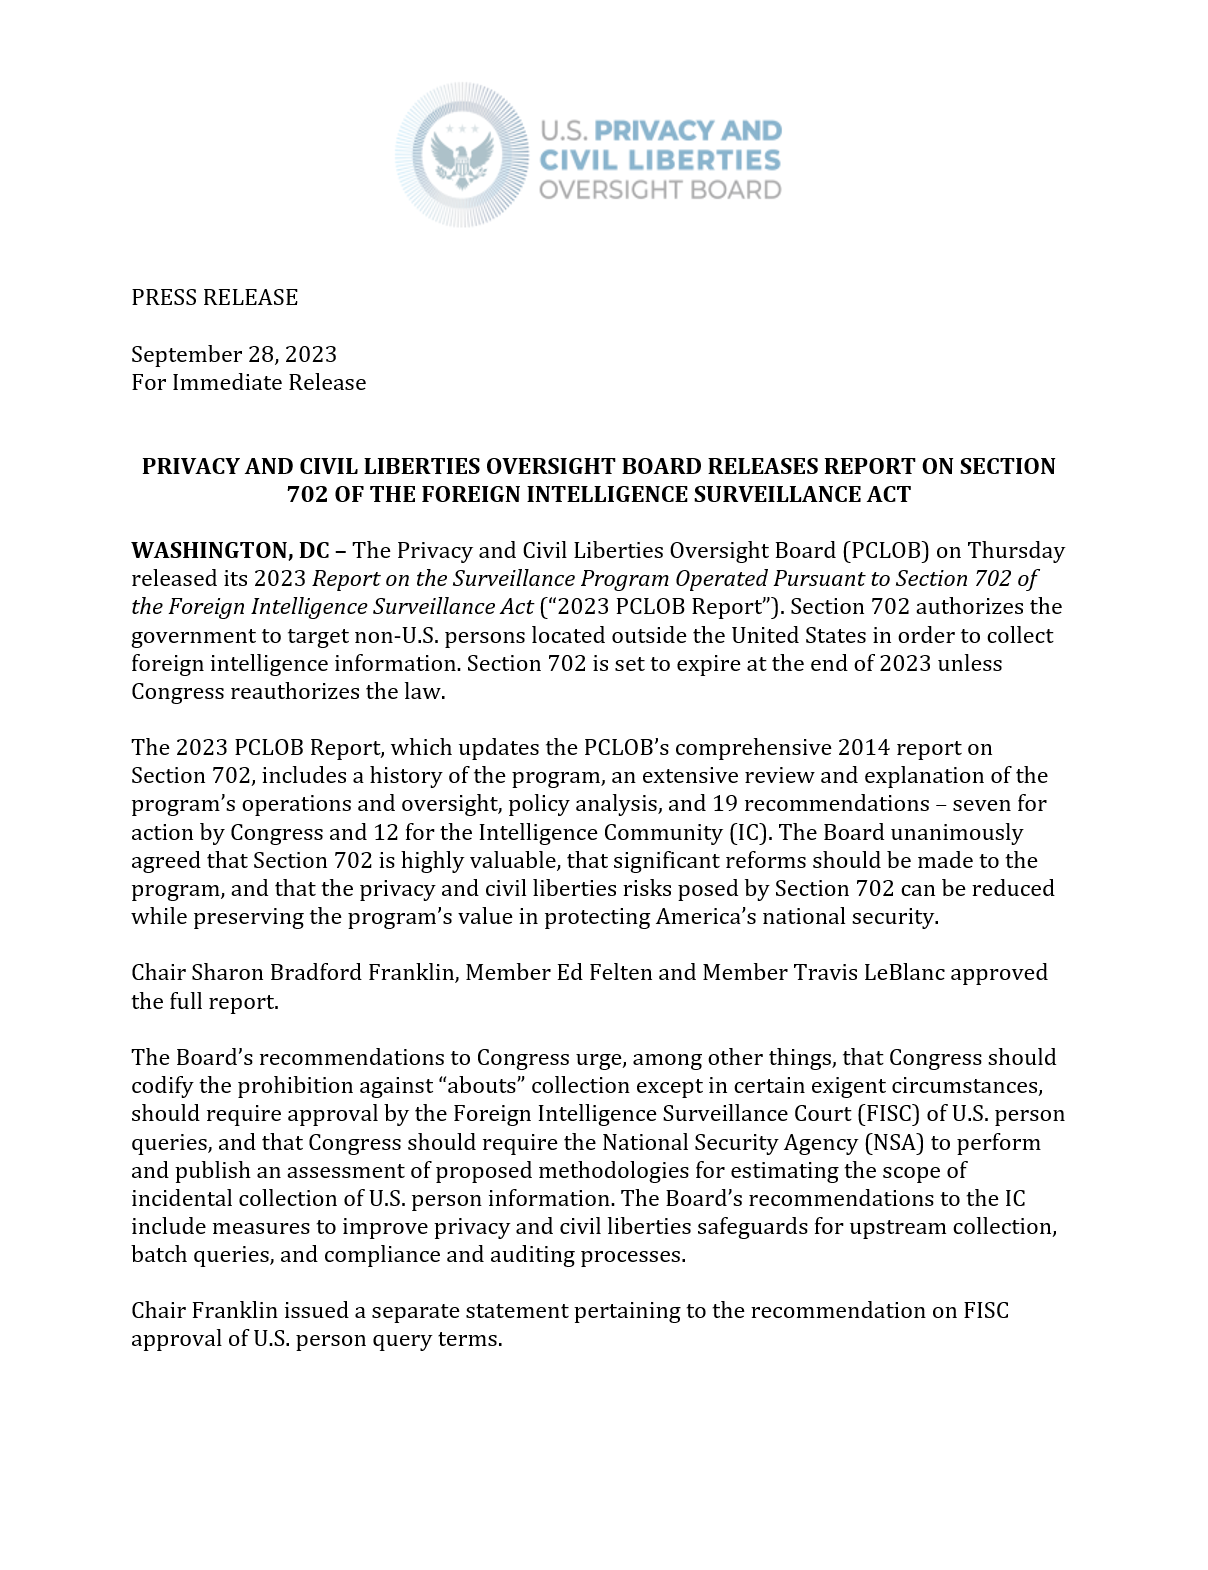 Press Release - PCLOB FISA Section 702 Press Release